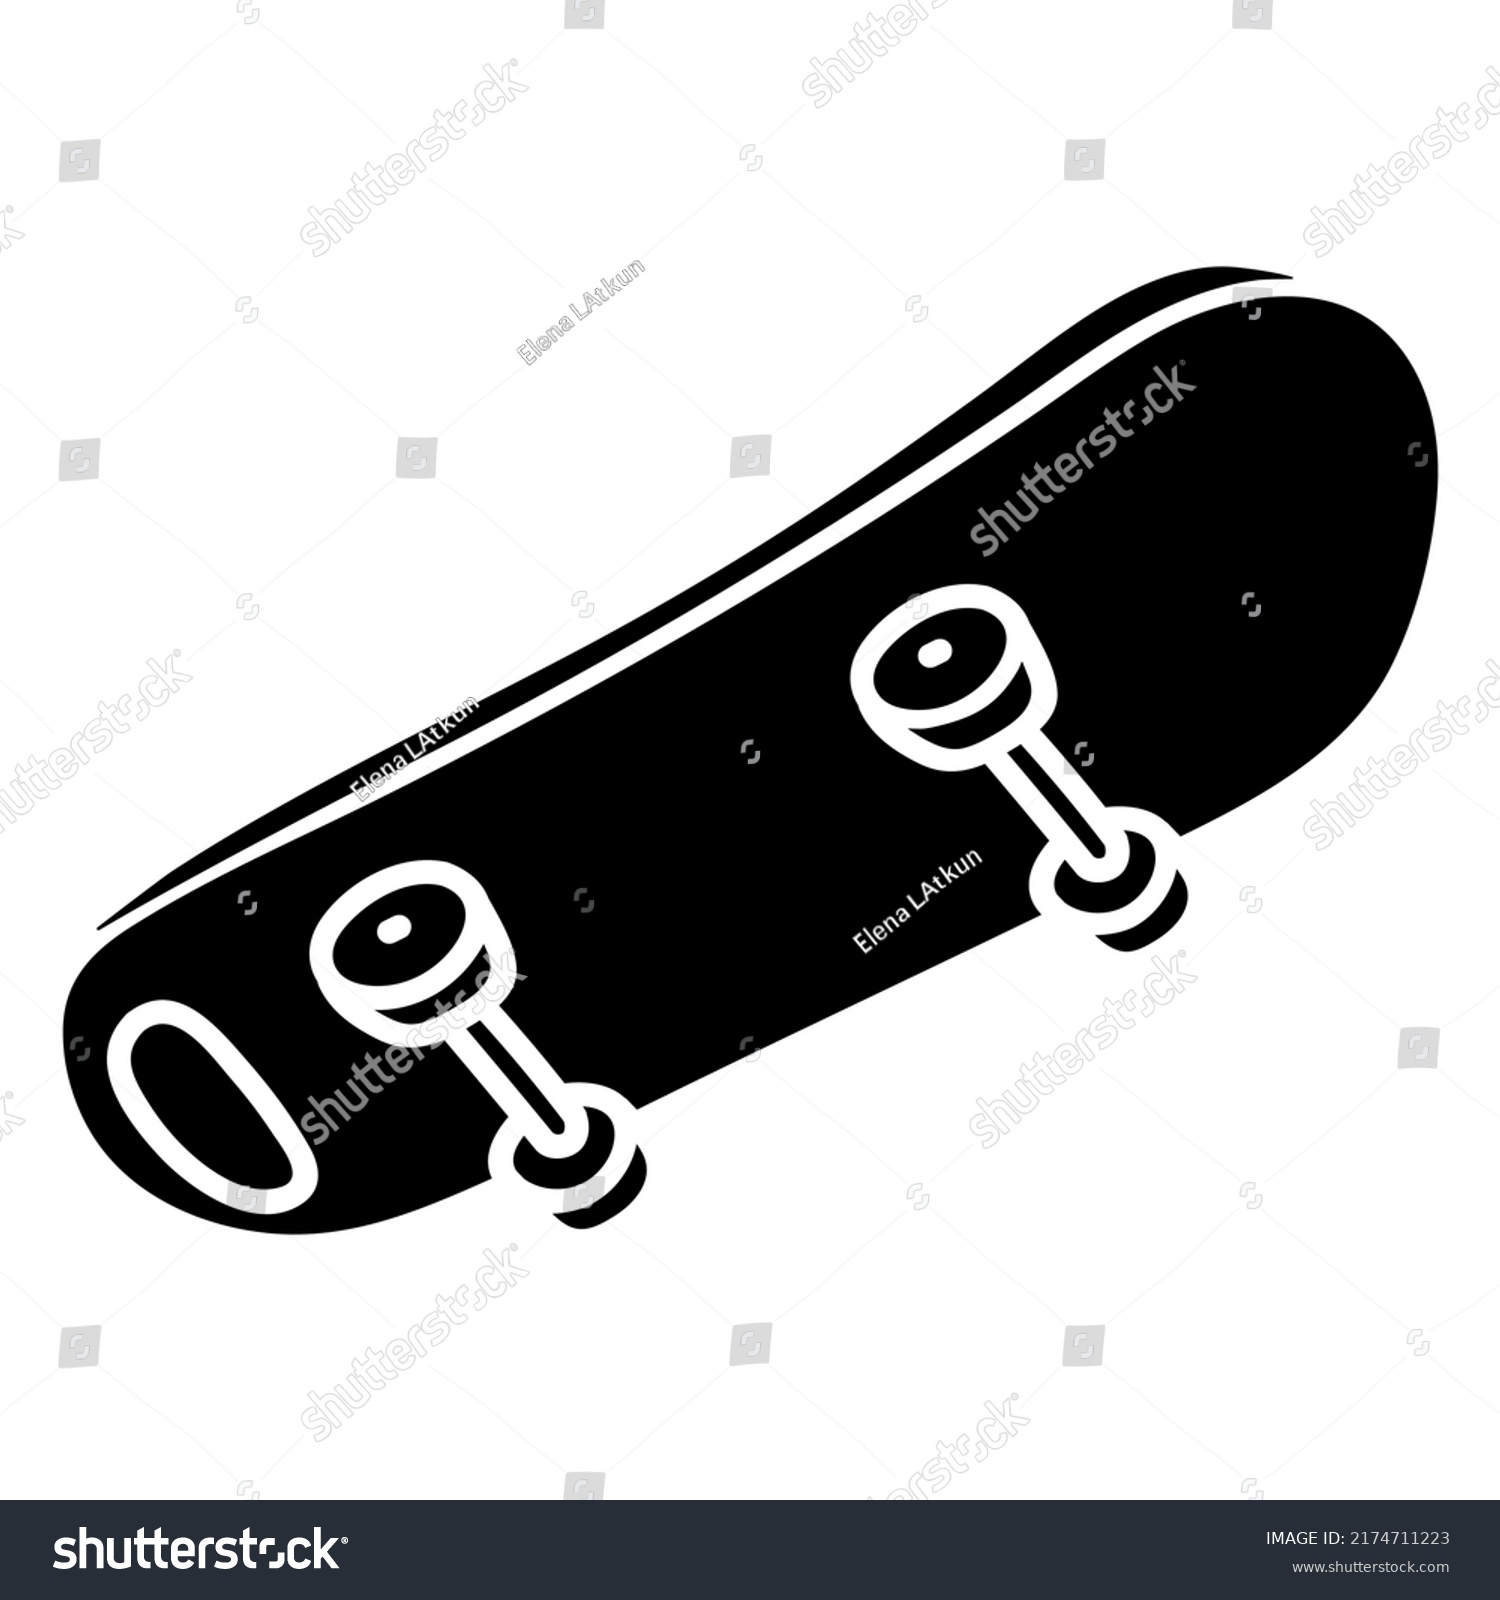 SVG of Black Skateboard Cut Out. High quality vector svg